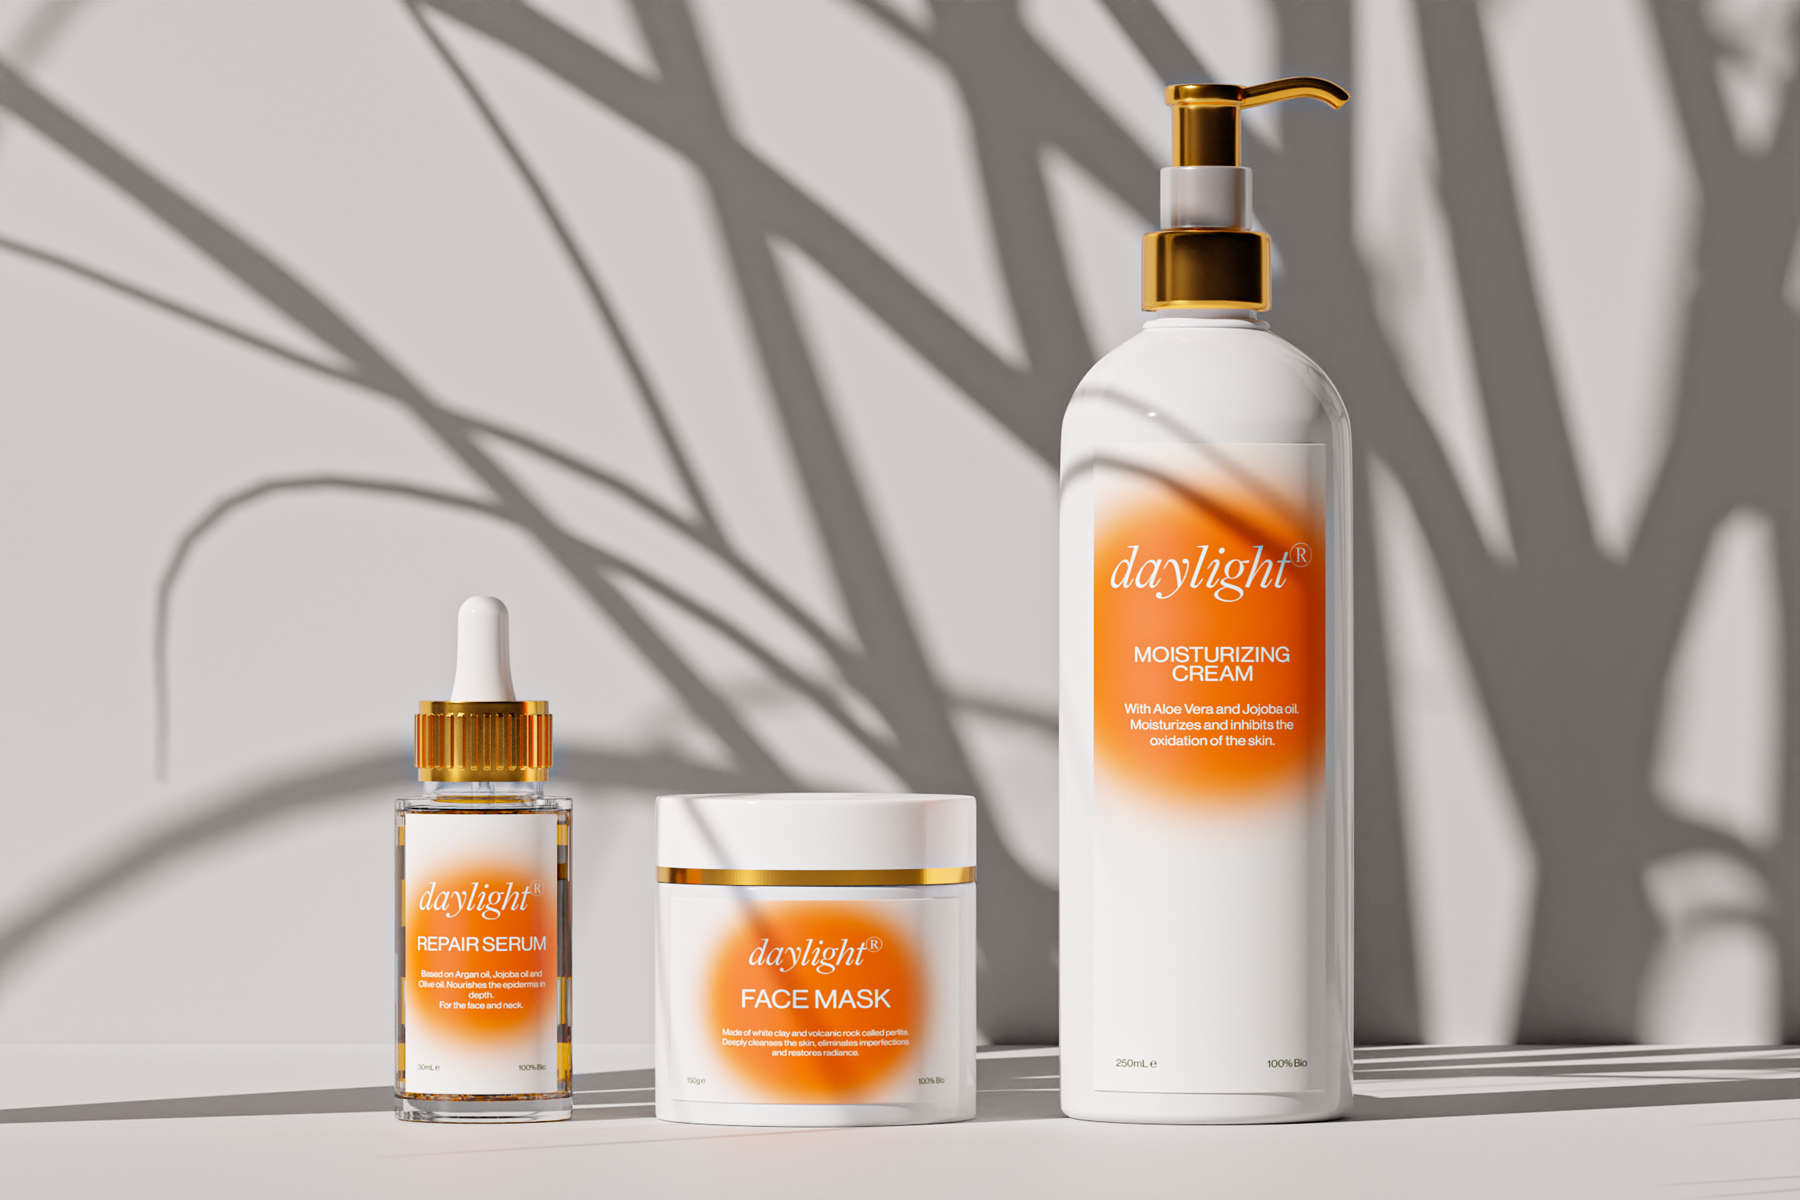 Daylight Natural Skincare Branding and Packaging Design